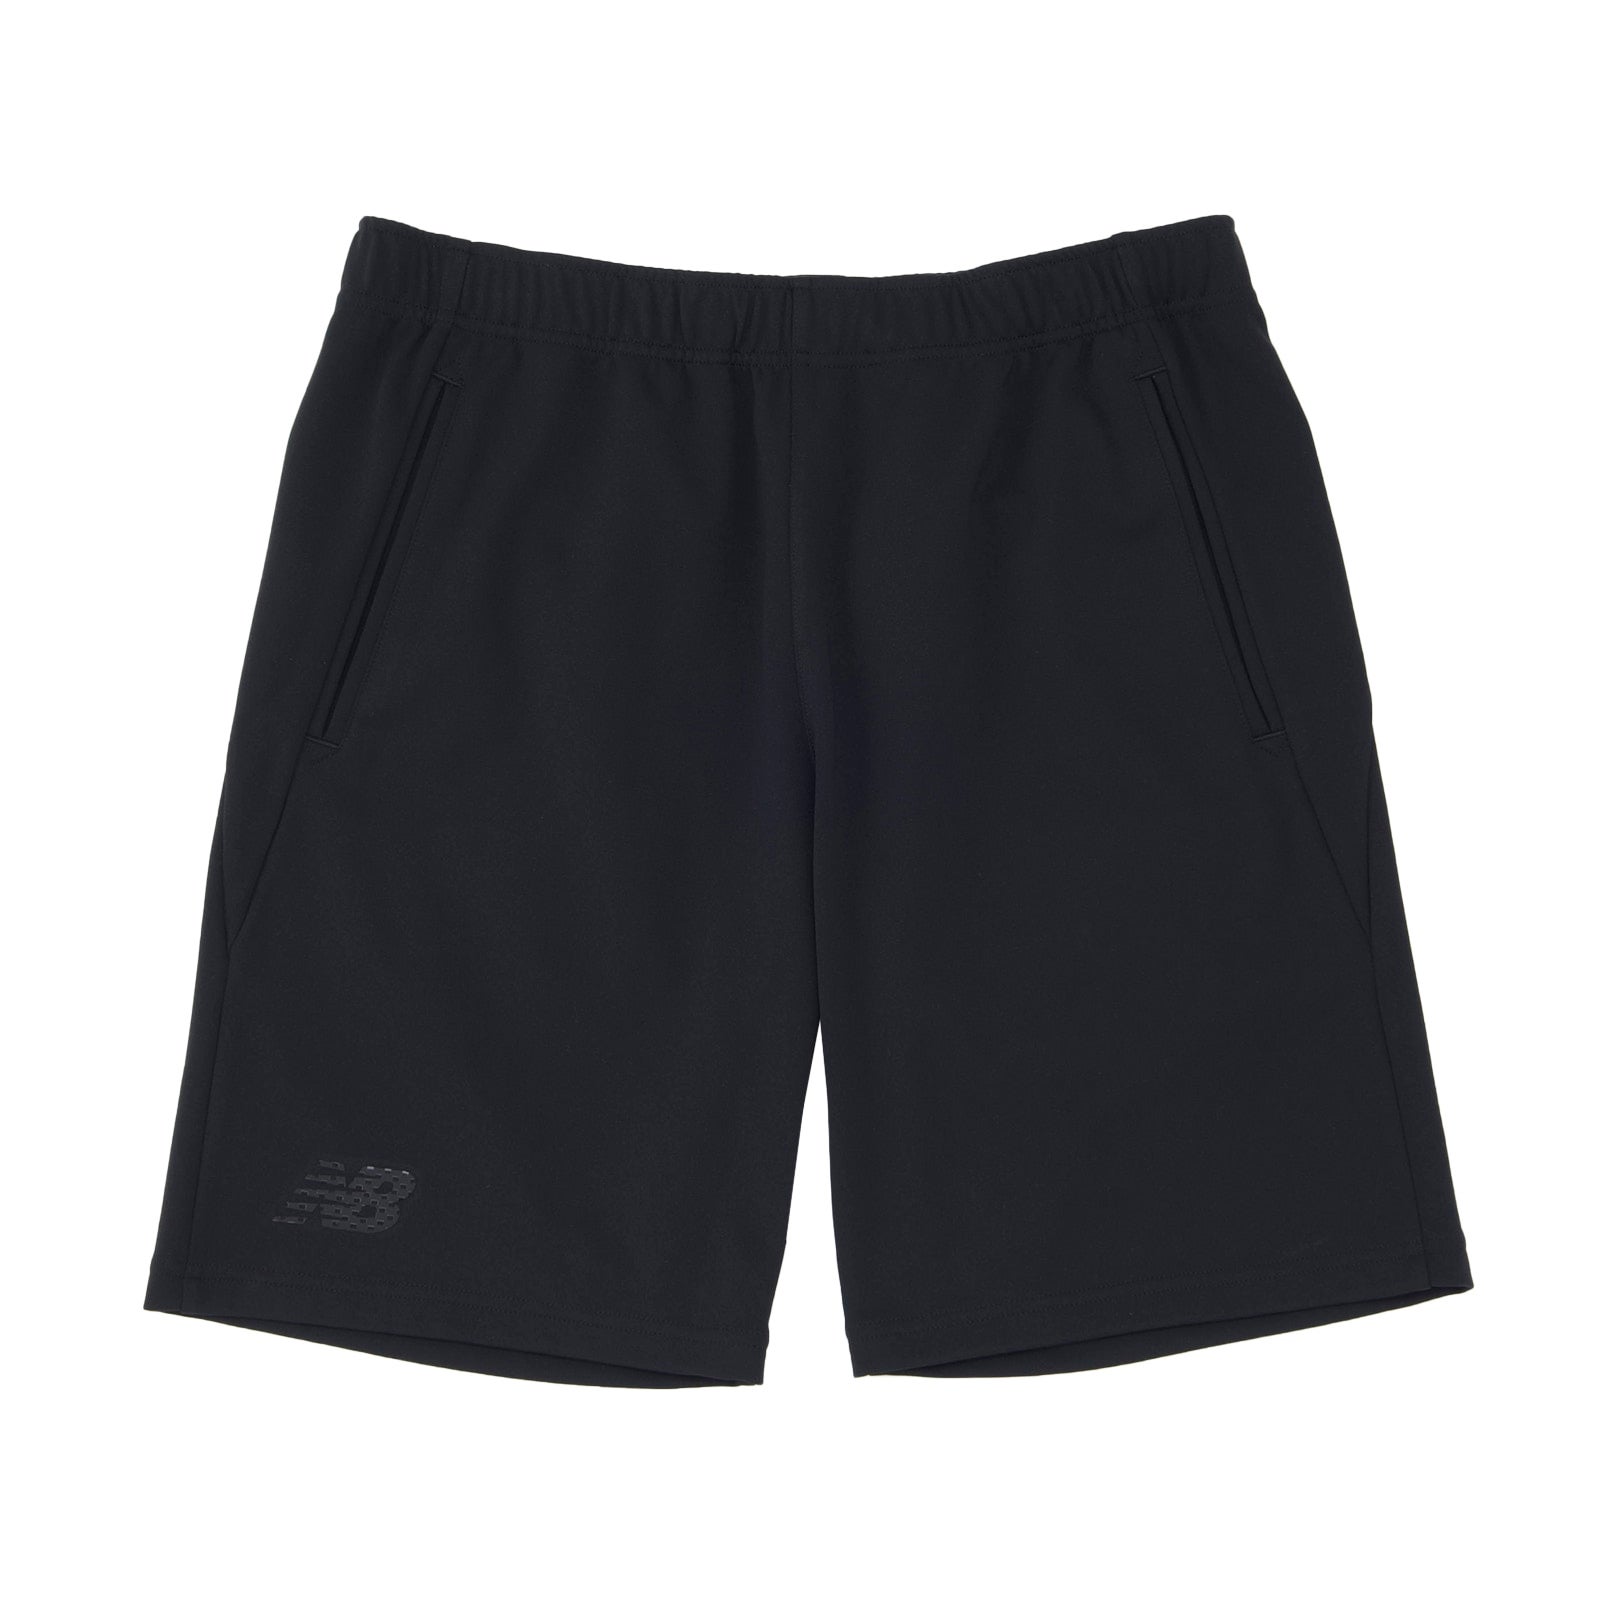 Black Out Collection Premier Edition Police Sweat Shorts